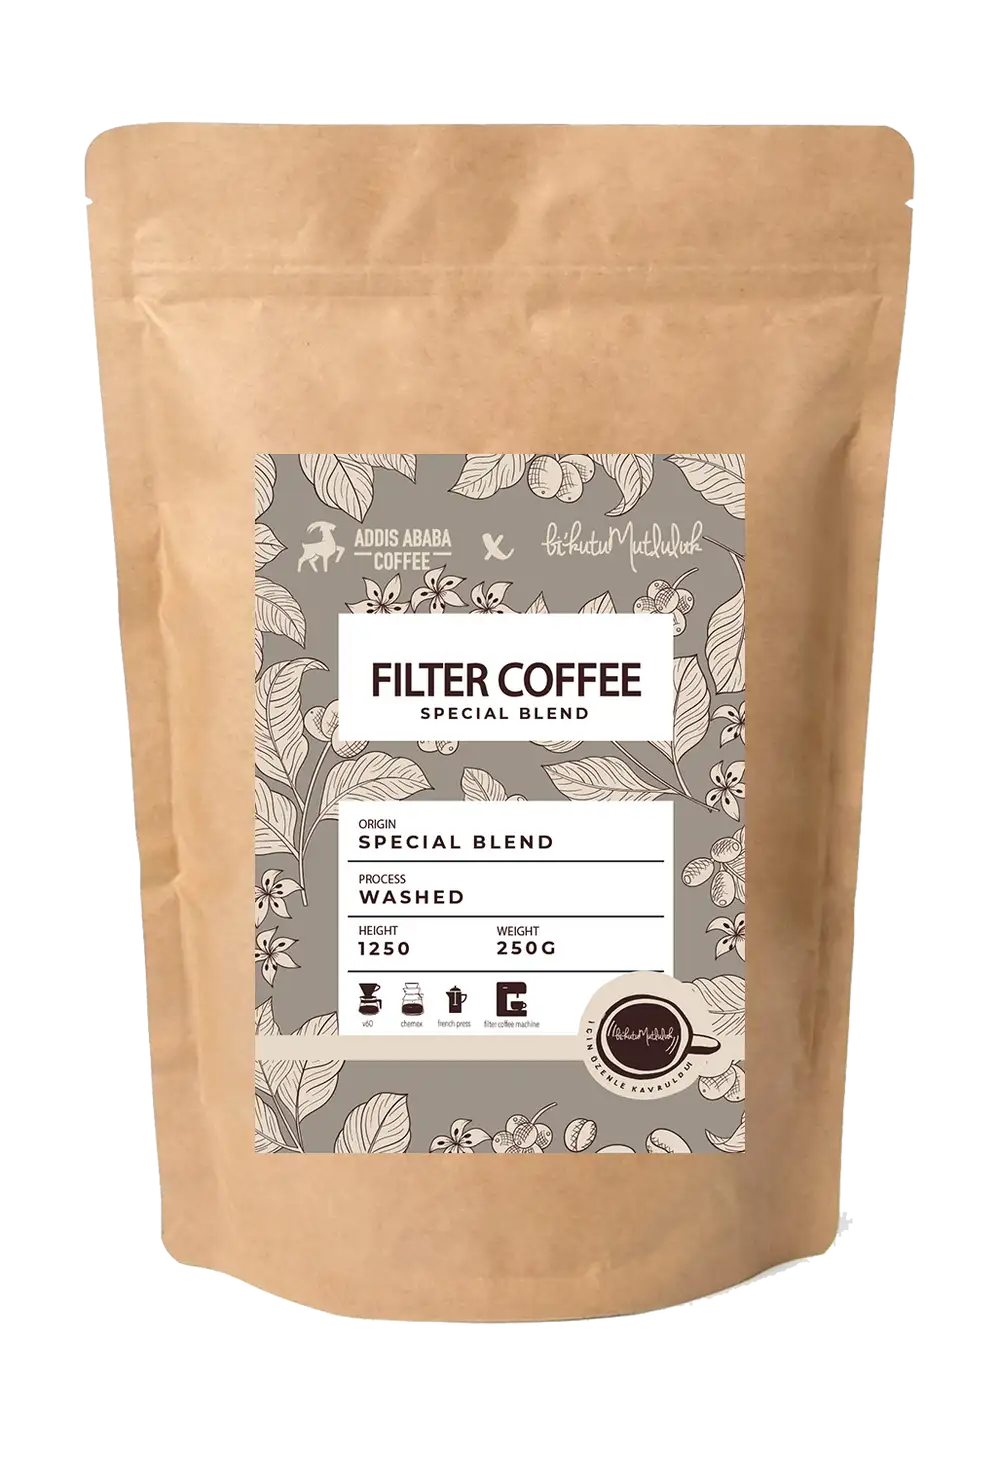 Filtre Kahve - Relax Gri Special Blend Filter Coffee Addis Ababa Coffee 50 gr.